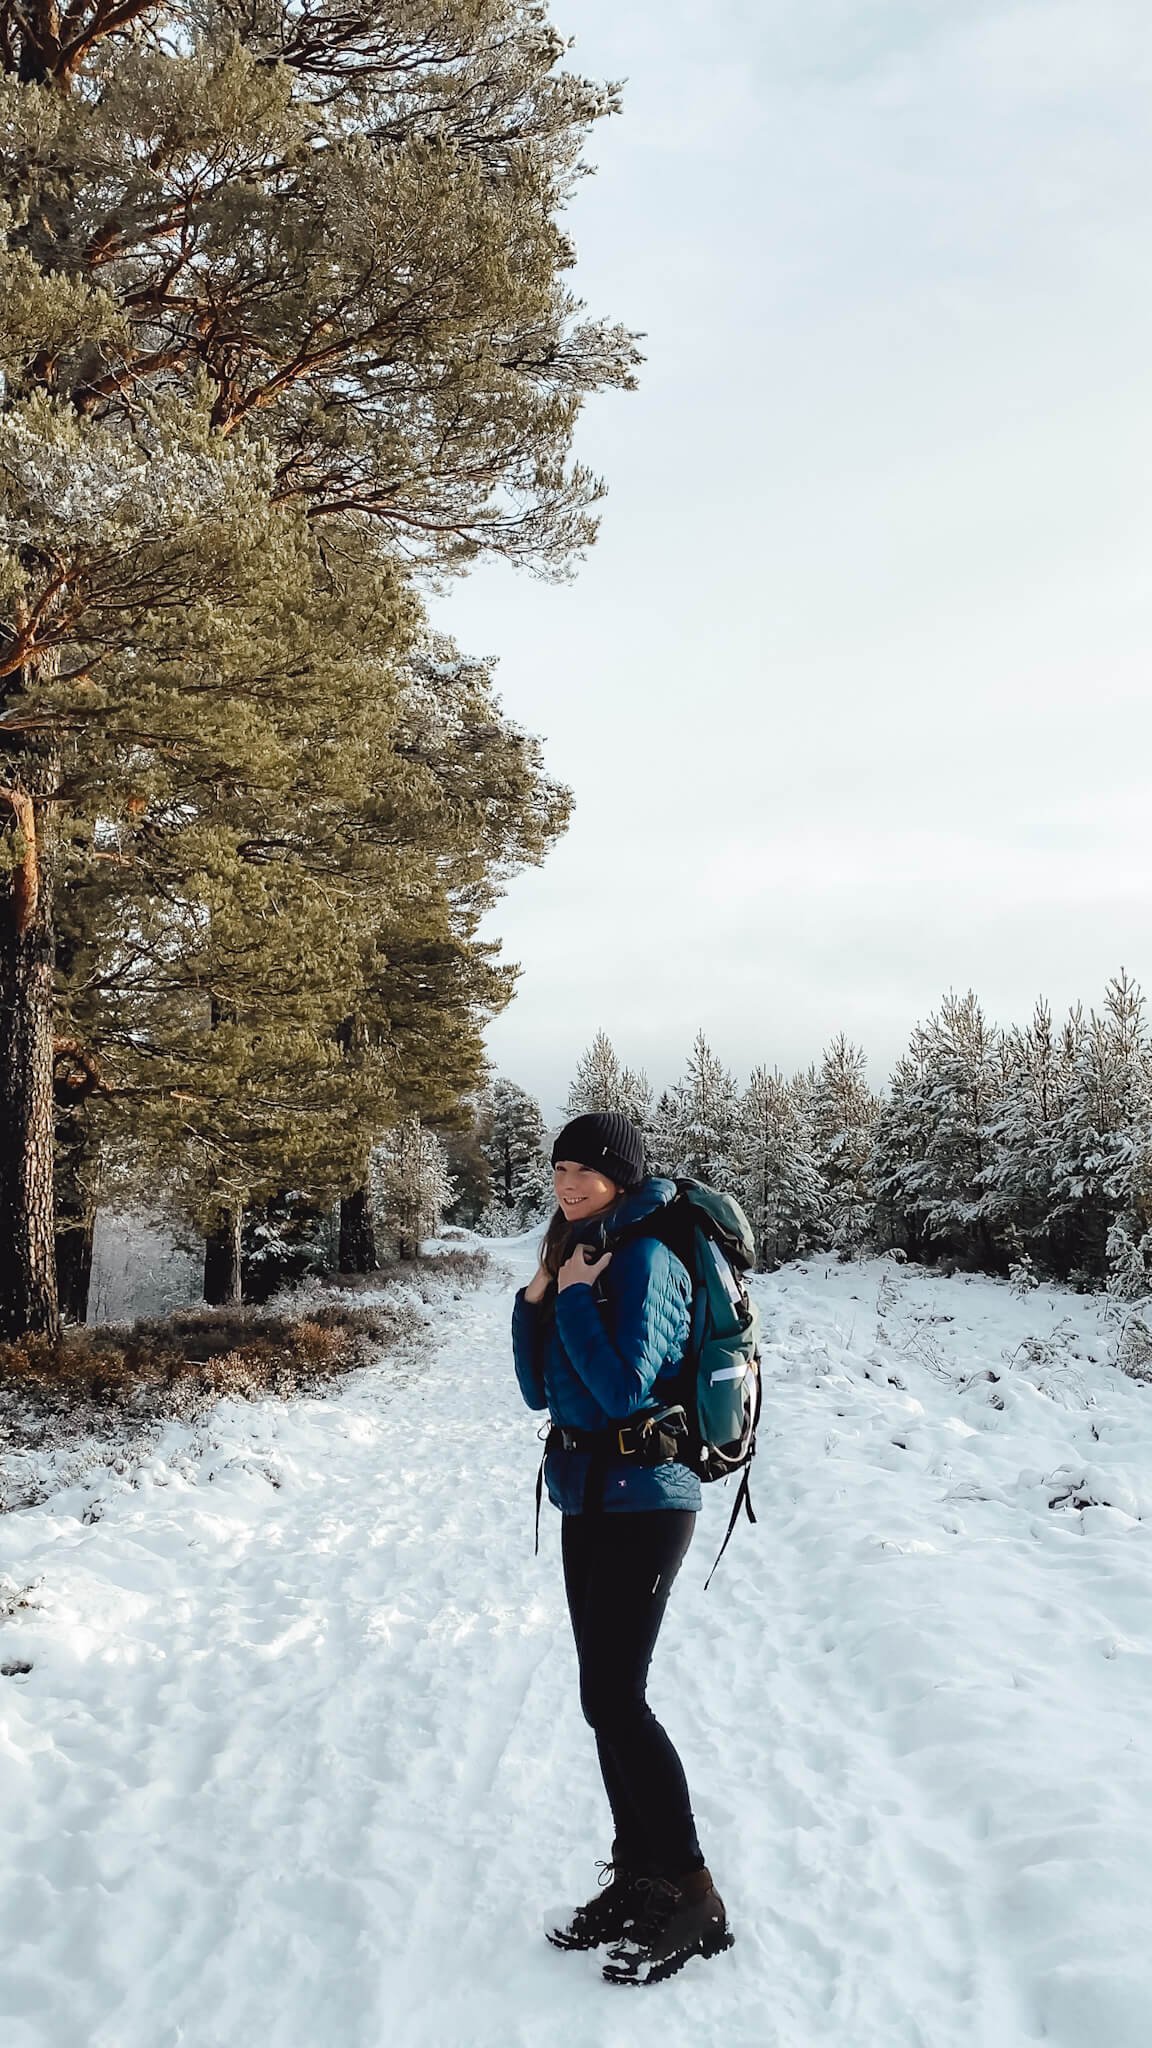 Winter Hiking Outfit Ideas: Best Clothes To Stay Warm